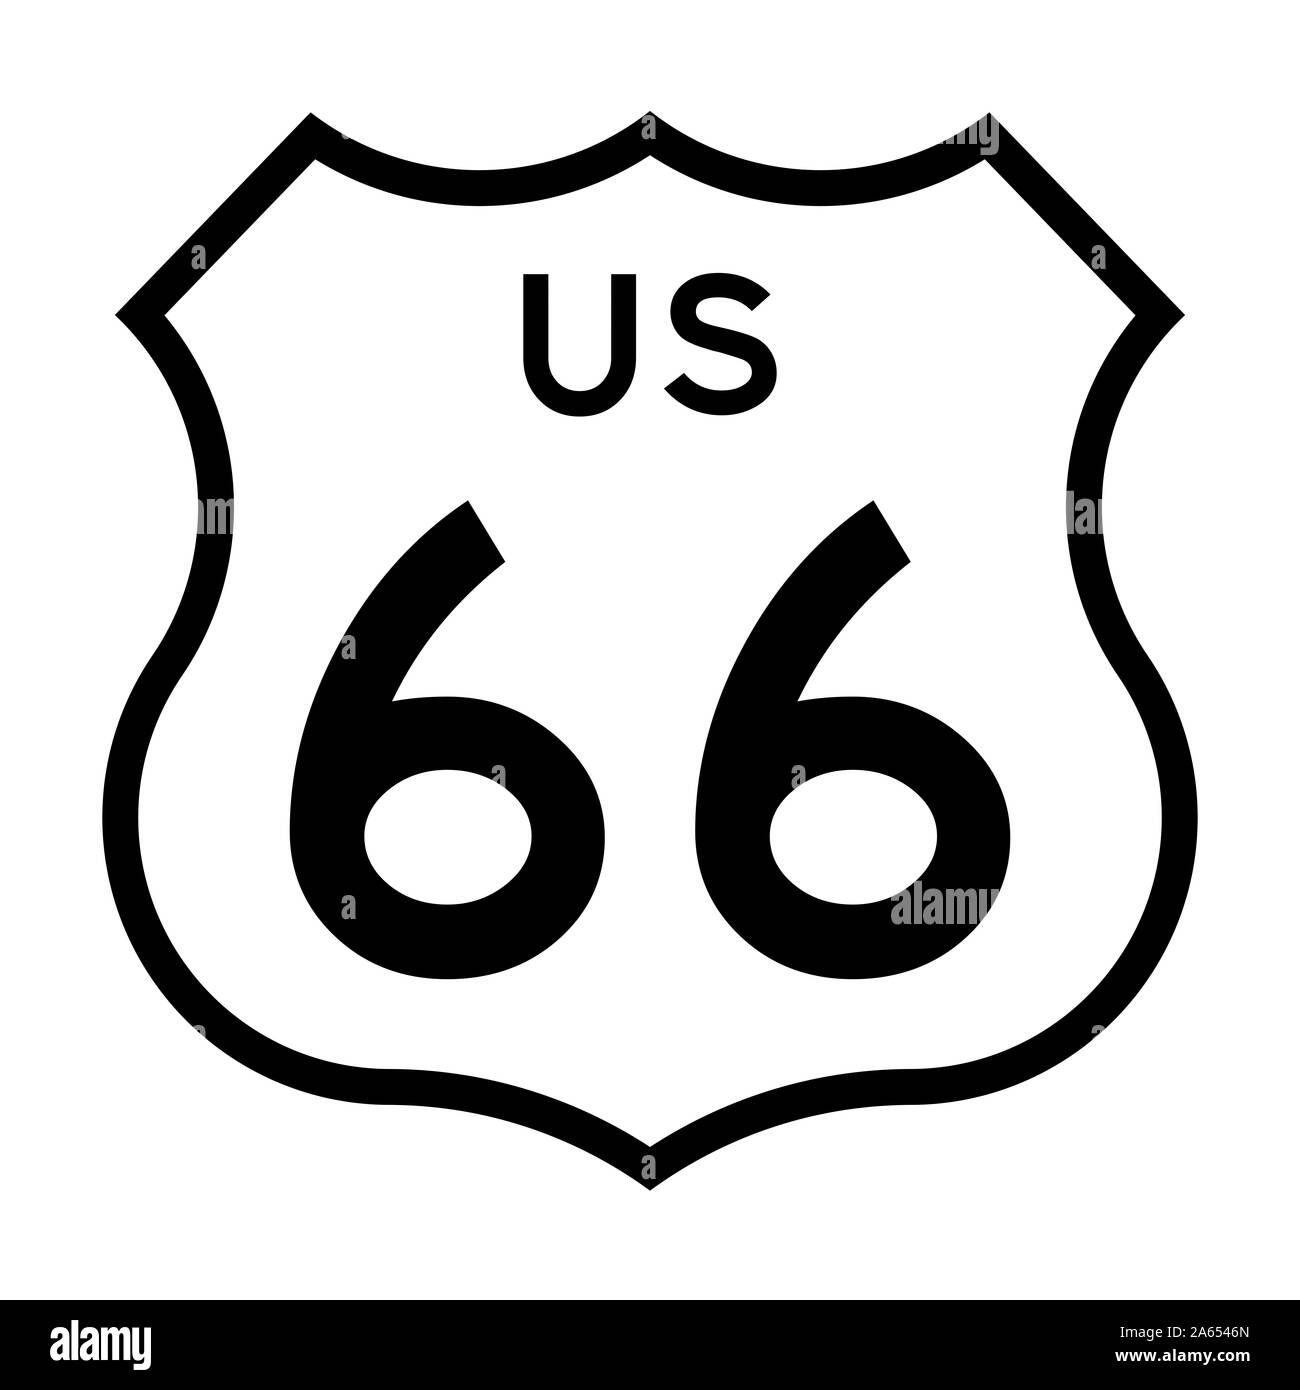 US route 66 sign Stock Photo - Alamy